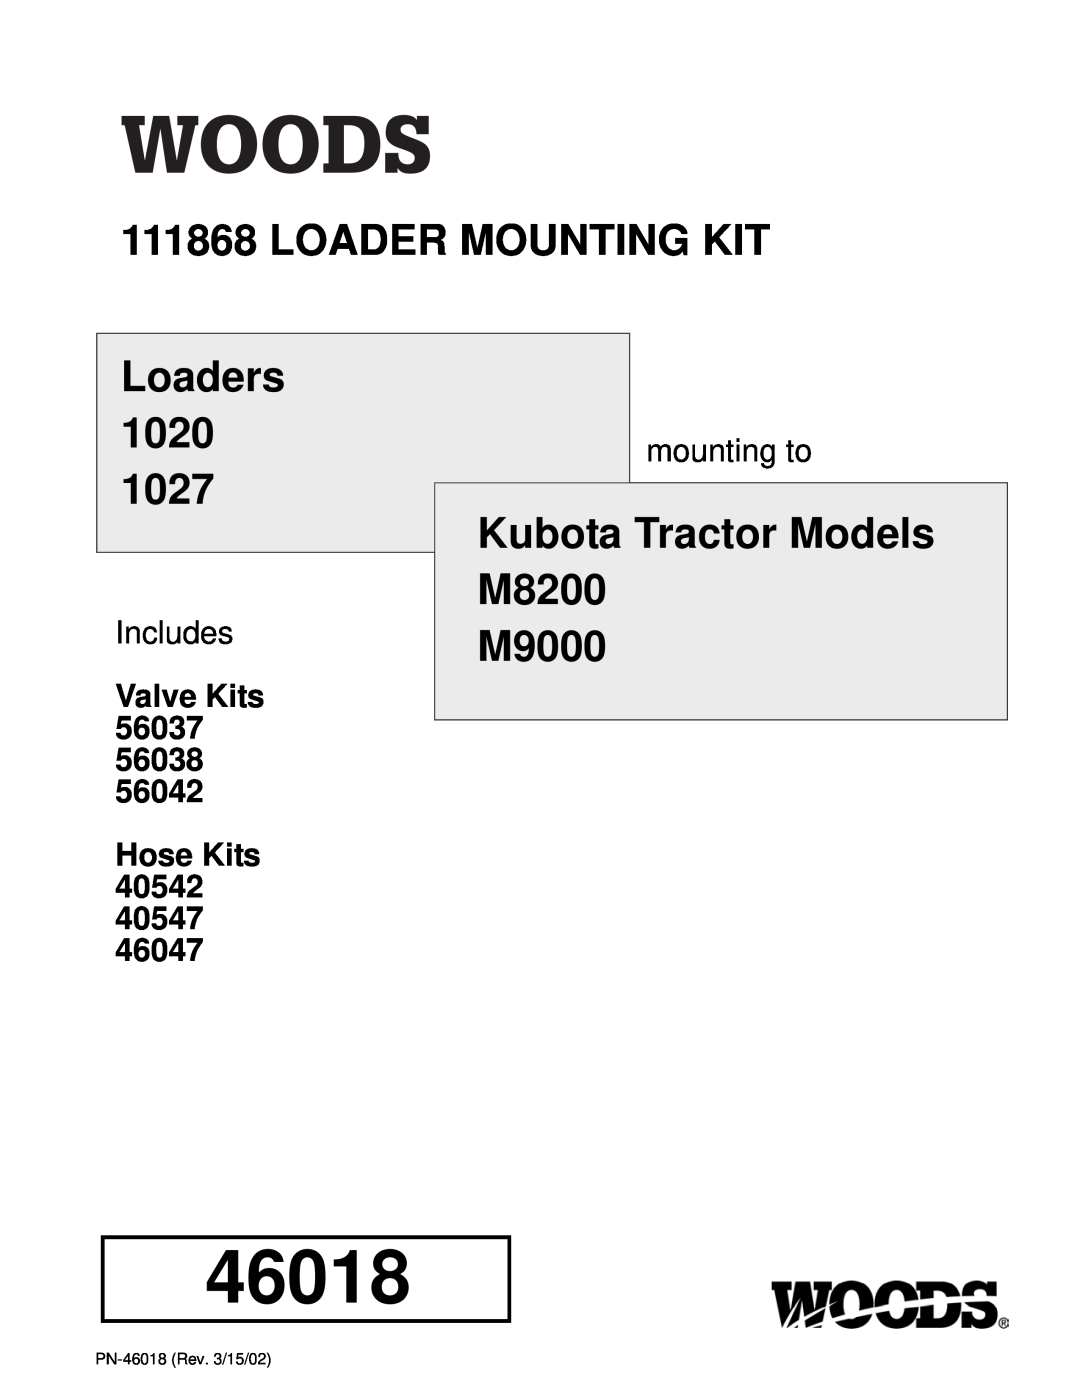 Woods Equipment manual Loader Mounting Kit, Loaders 1020, Kubota Tractor Models M8200 M9000, Includes, mounting to 